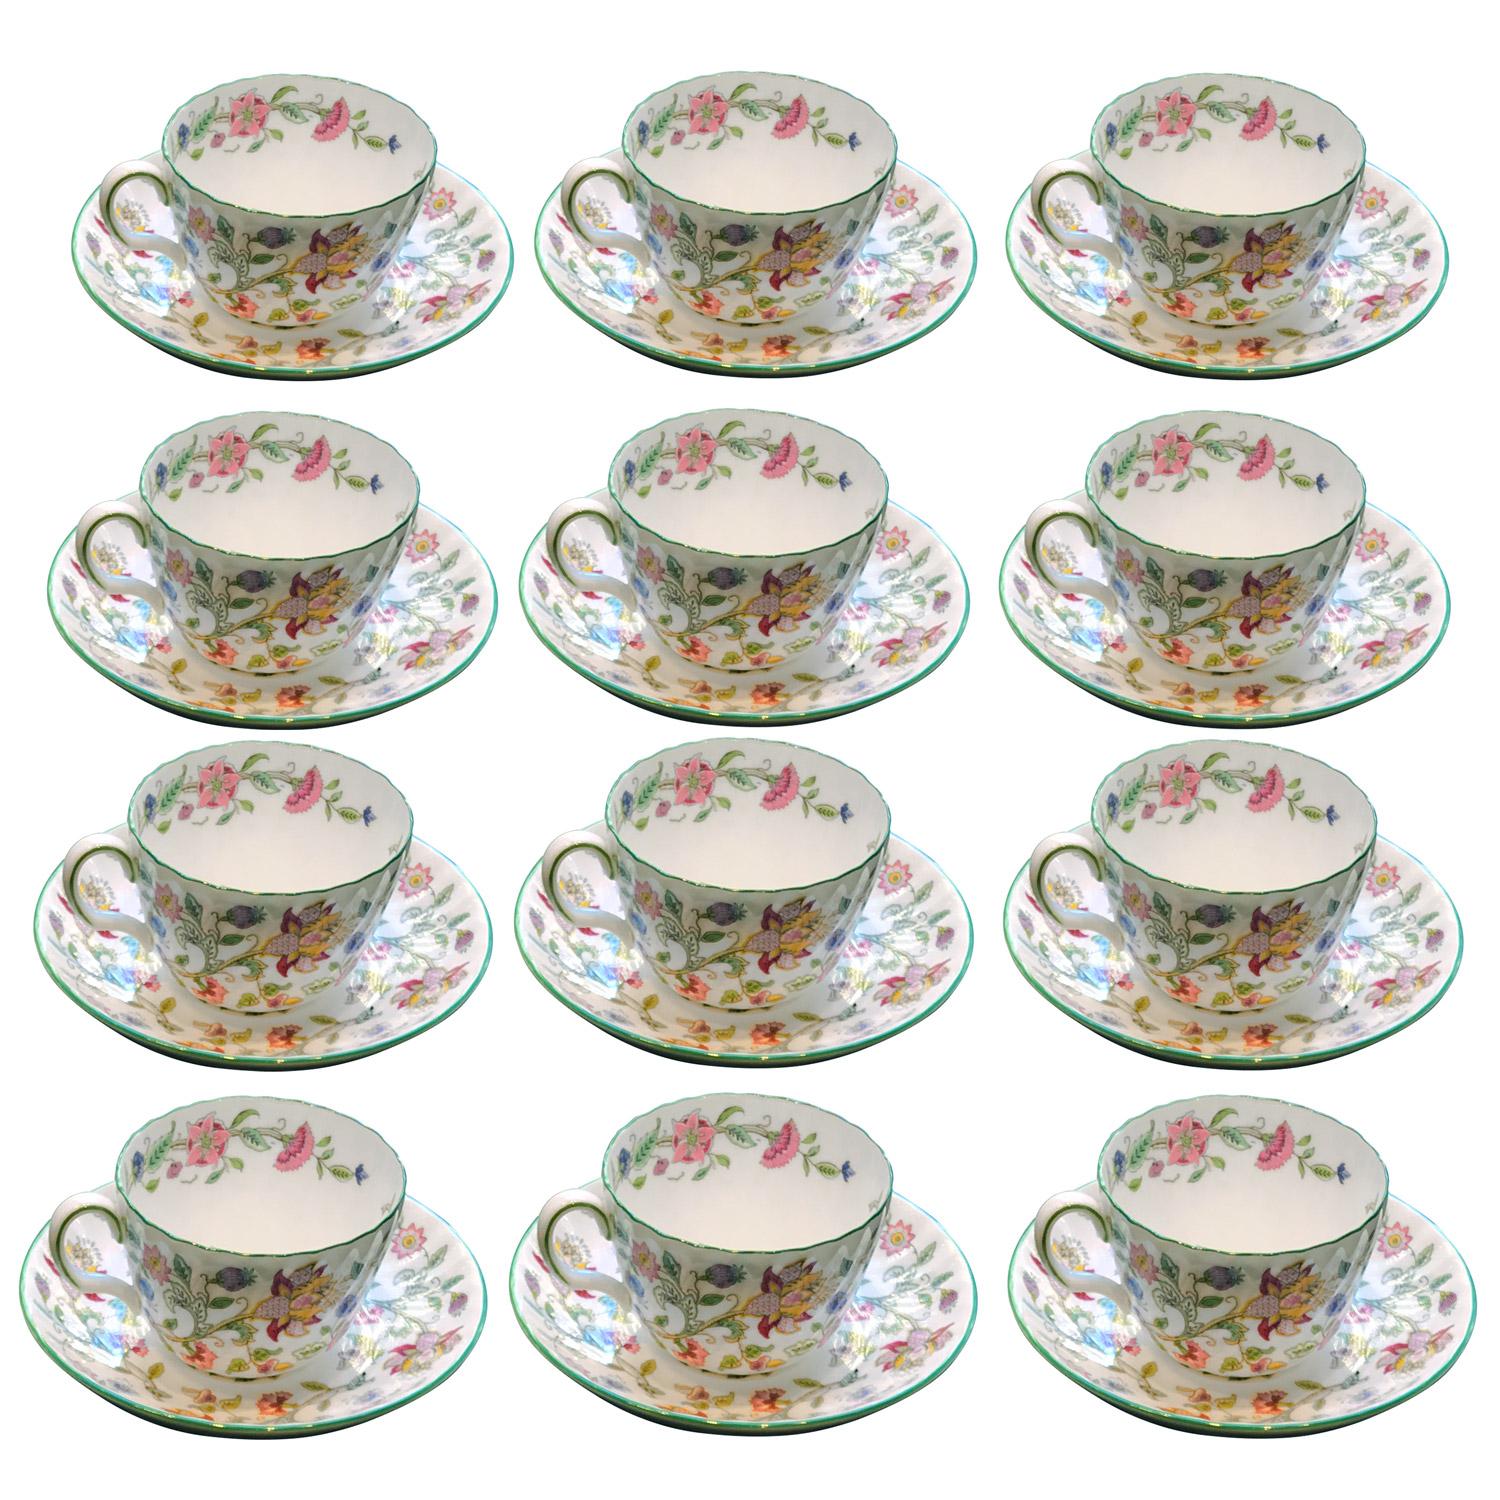 “HADDON HALL" MINTON 12 AVAILABLE -. DEMITASSE CUP & SAUCER 